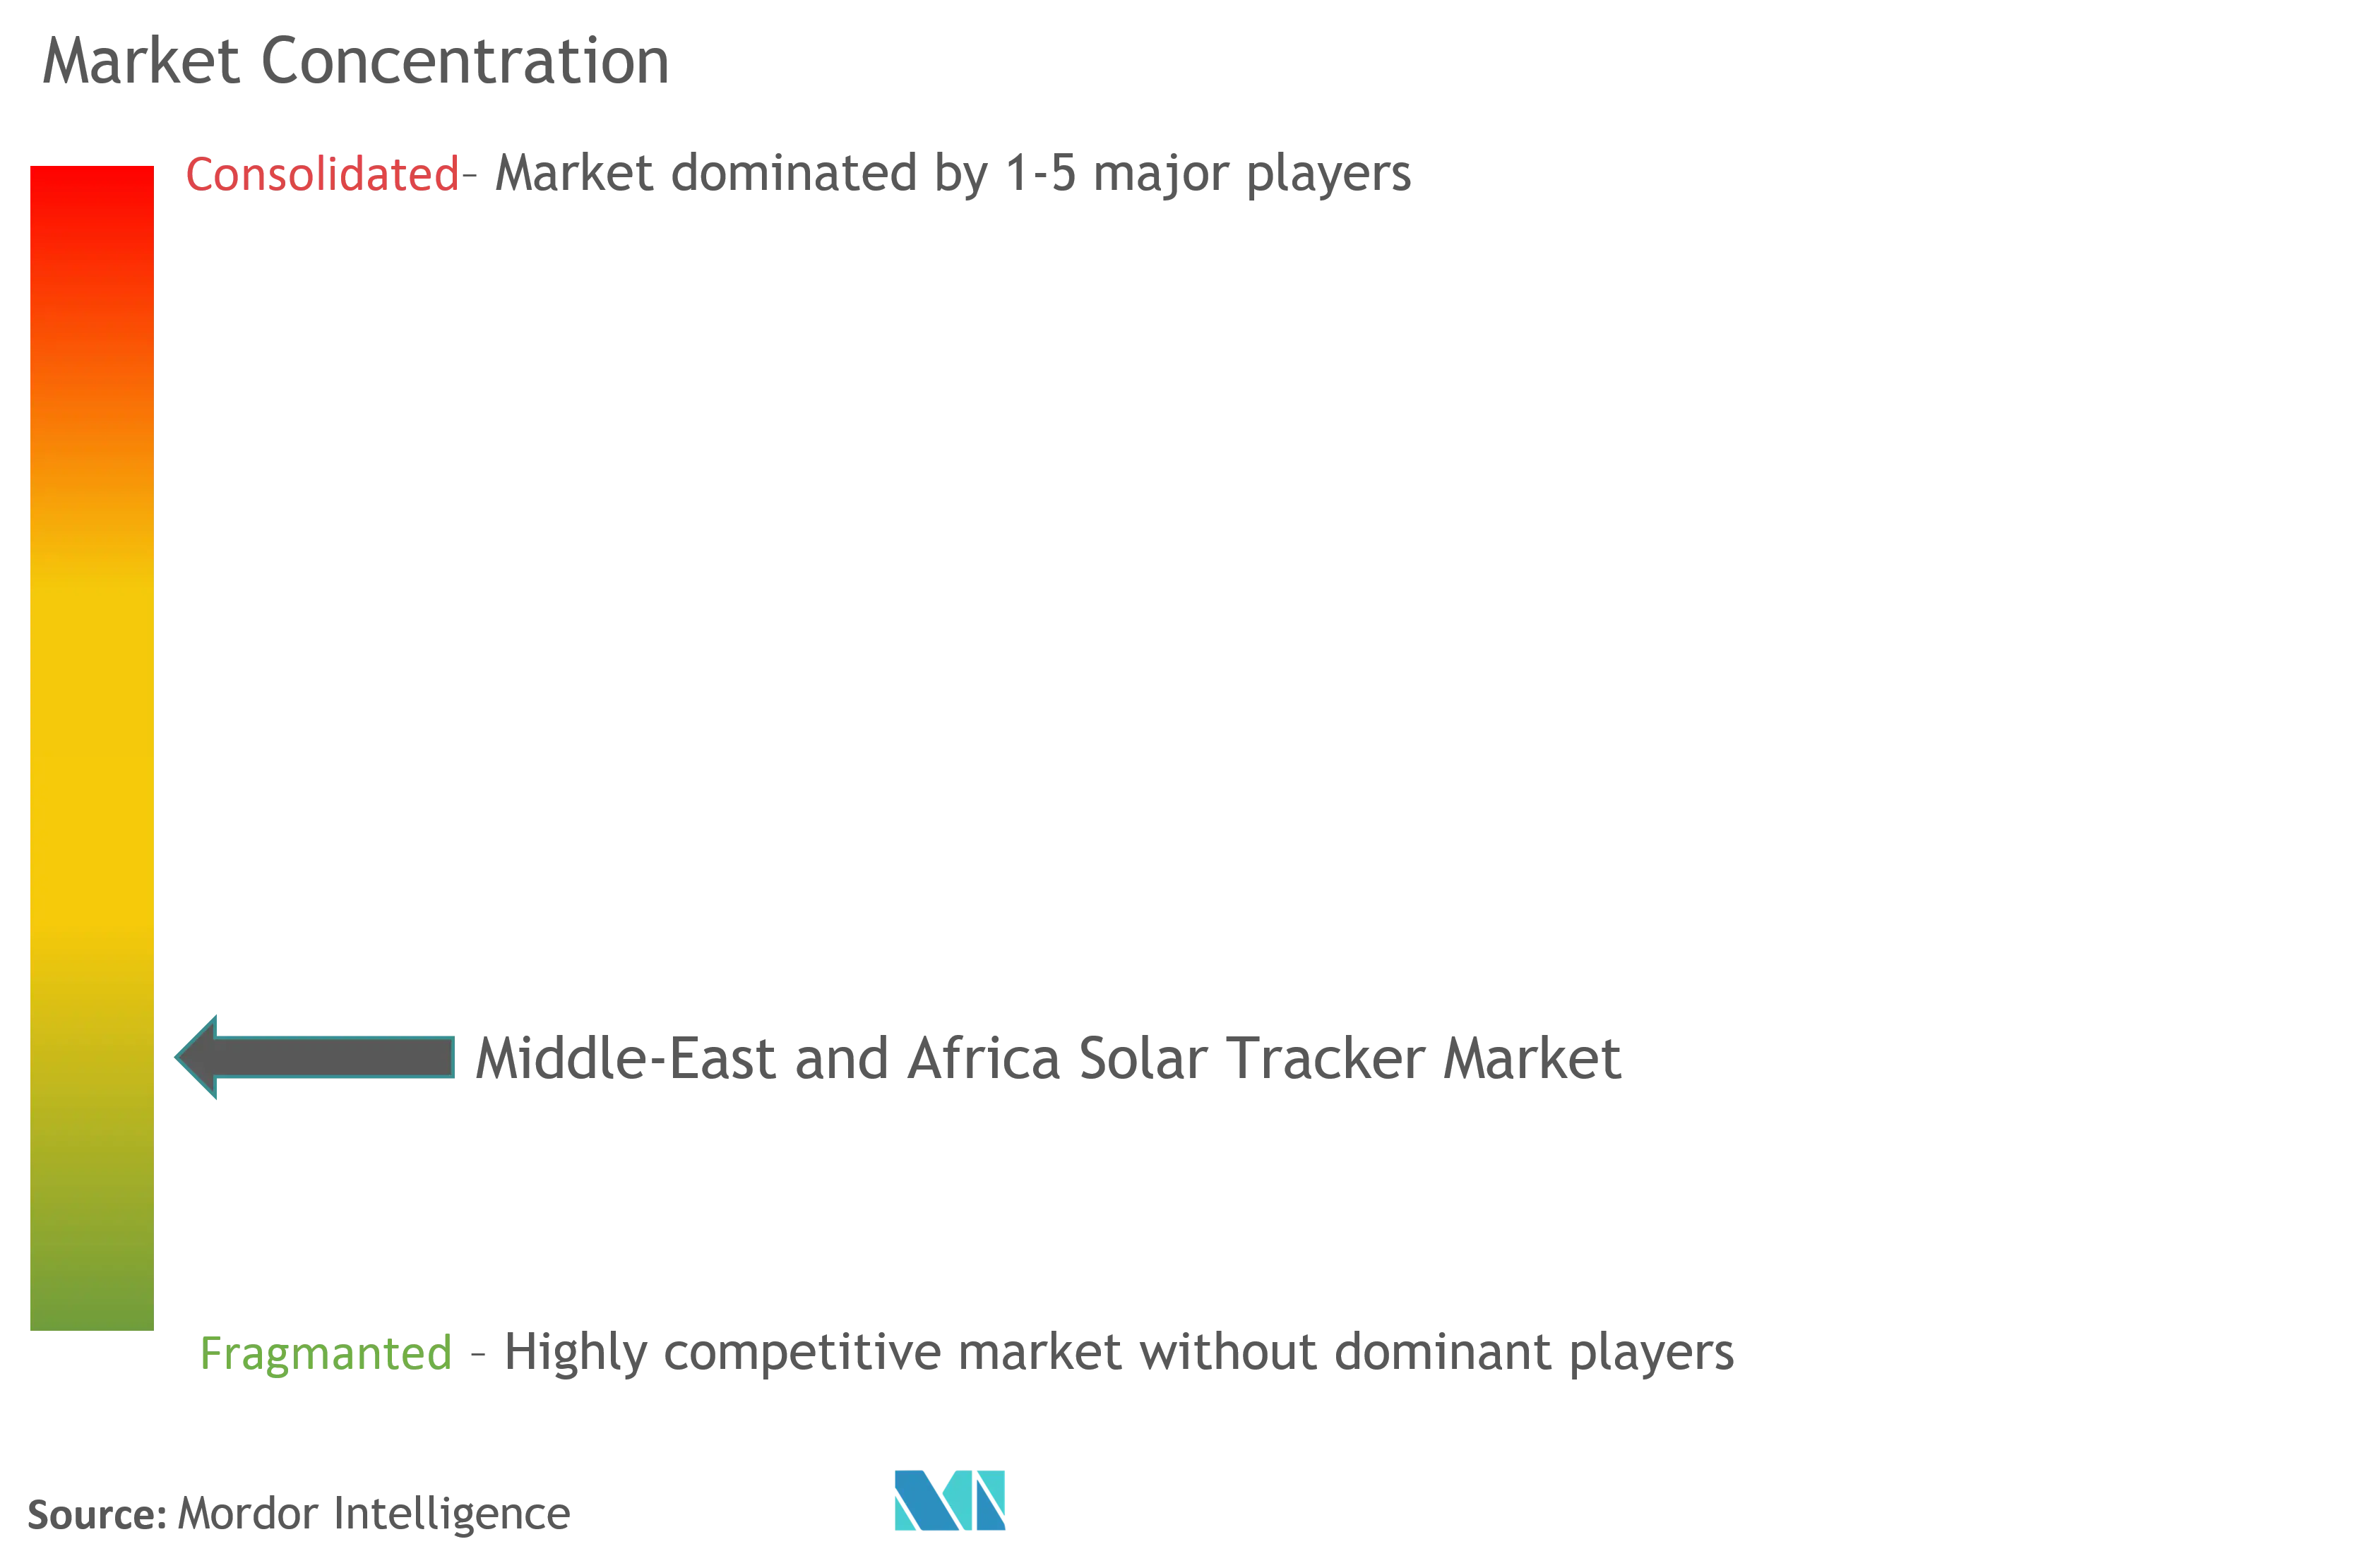 Middle East and Africa Solar Tracker Market Concentration